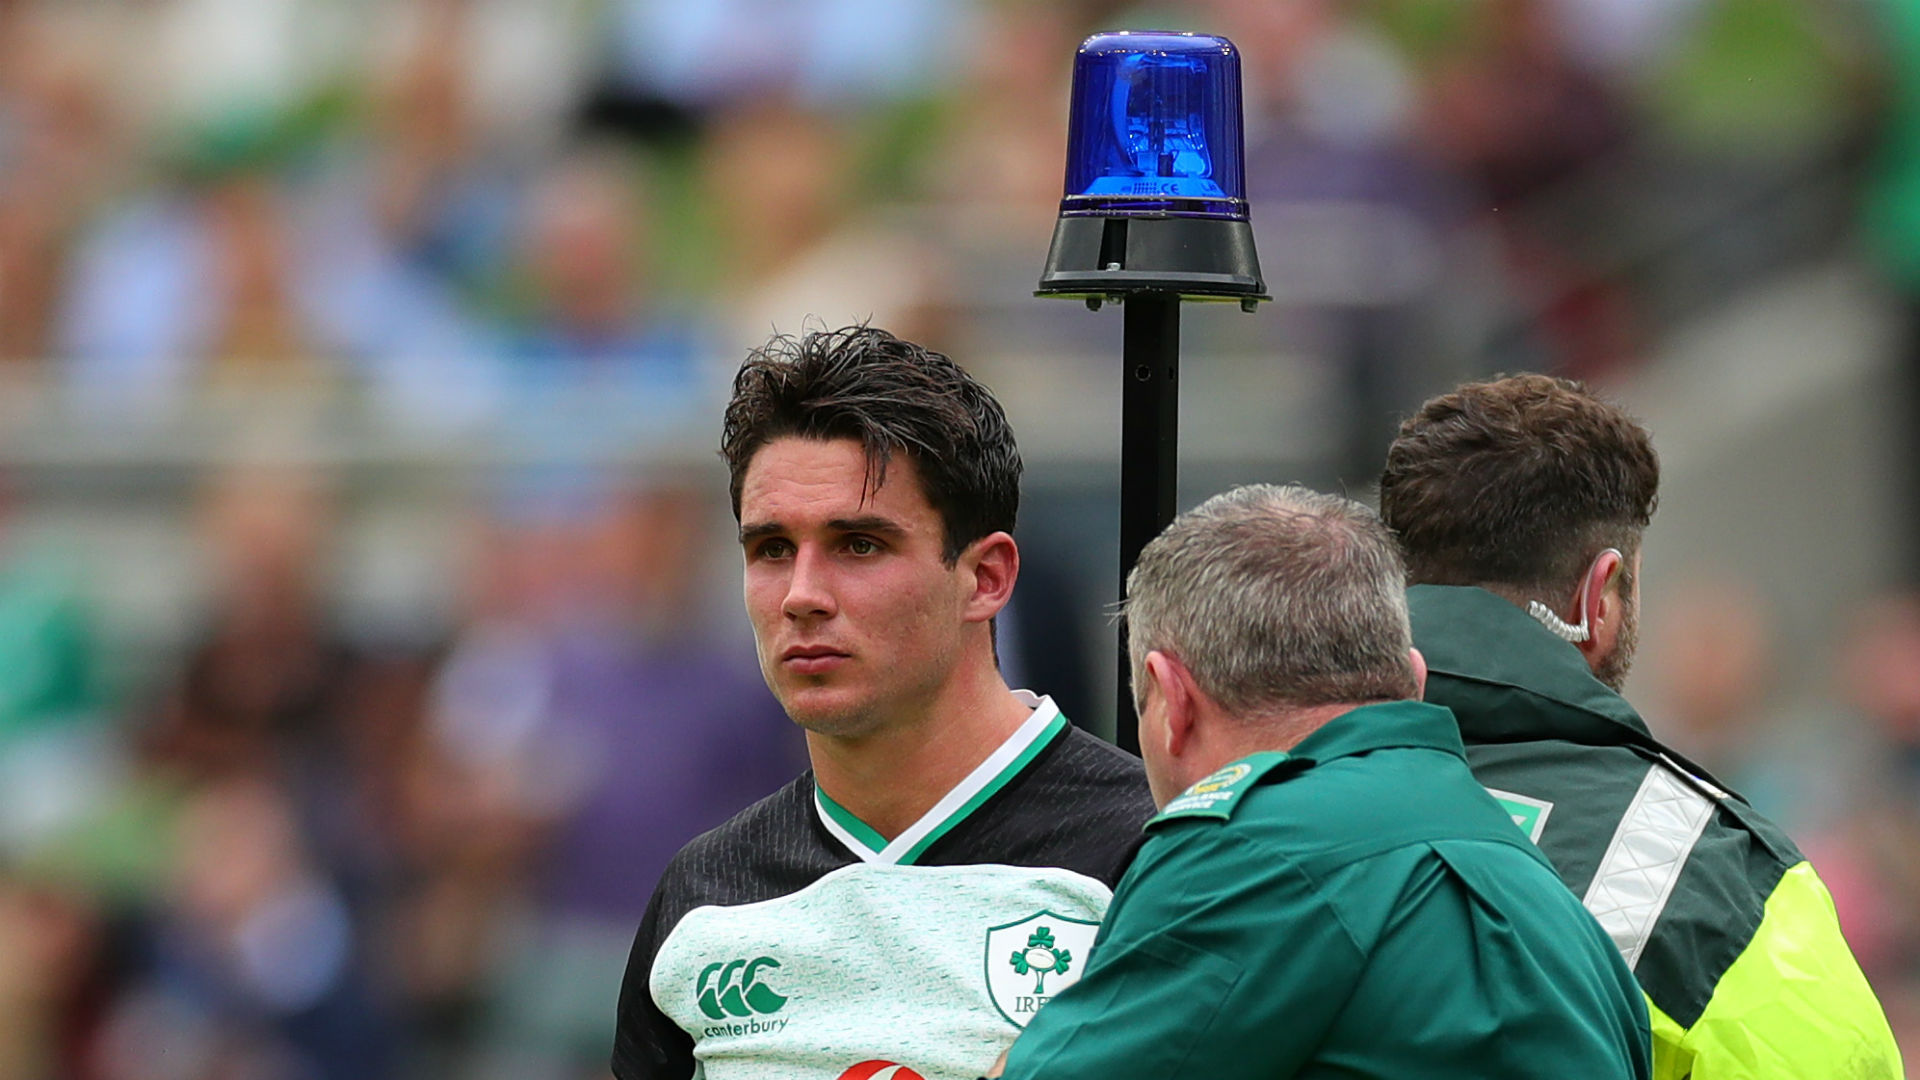 Fly-half Joey Carbery should be included in Ireland's Rugby World Cup squad as his ankle injury is not as serious as first feared.